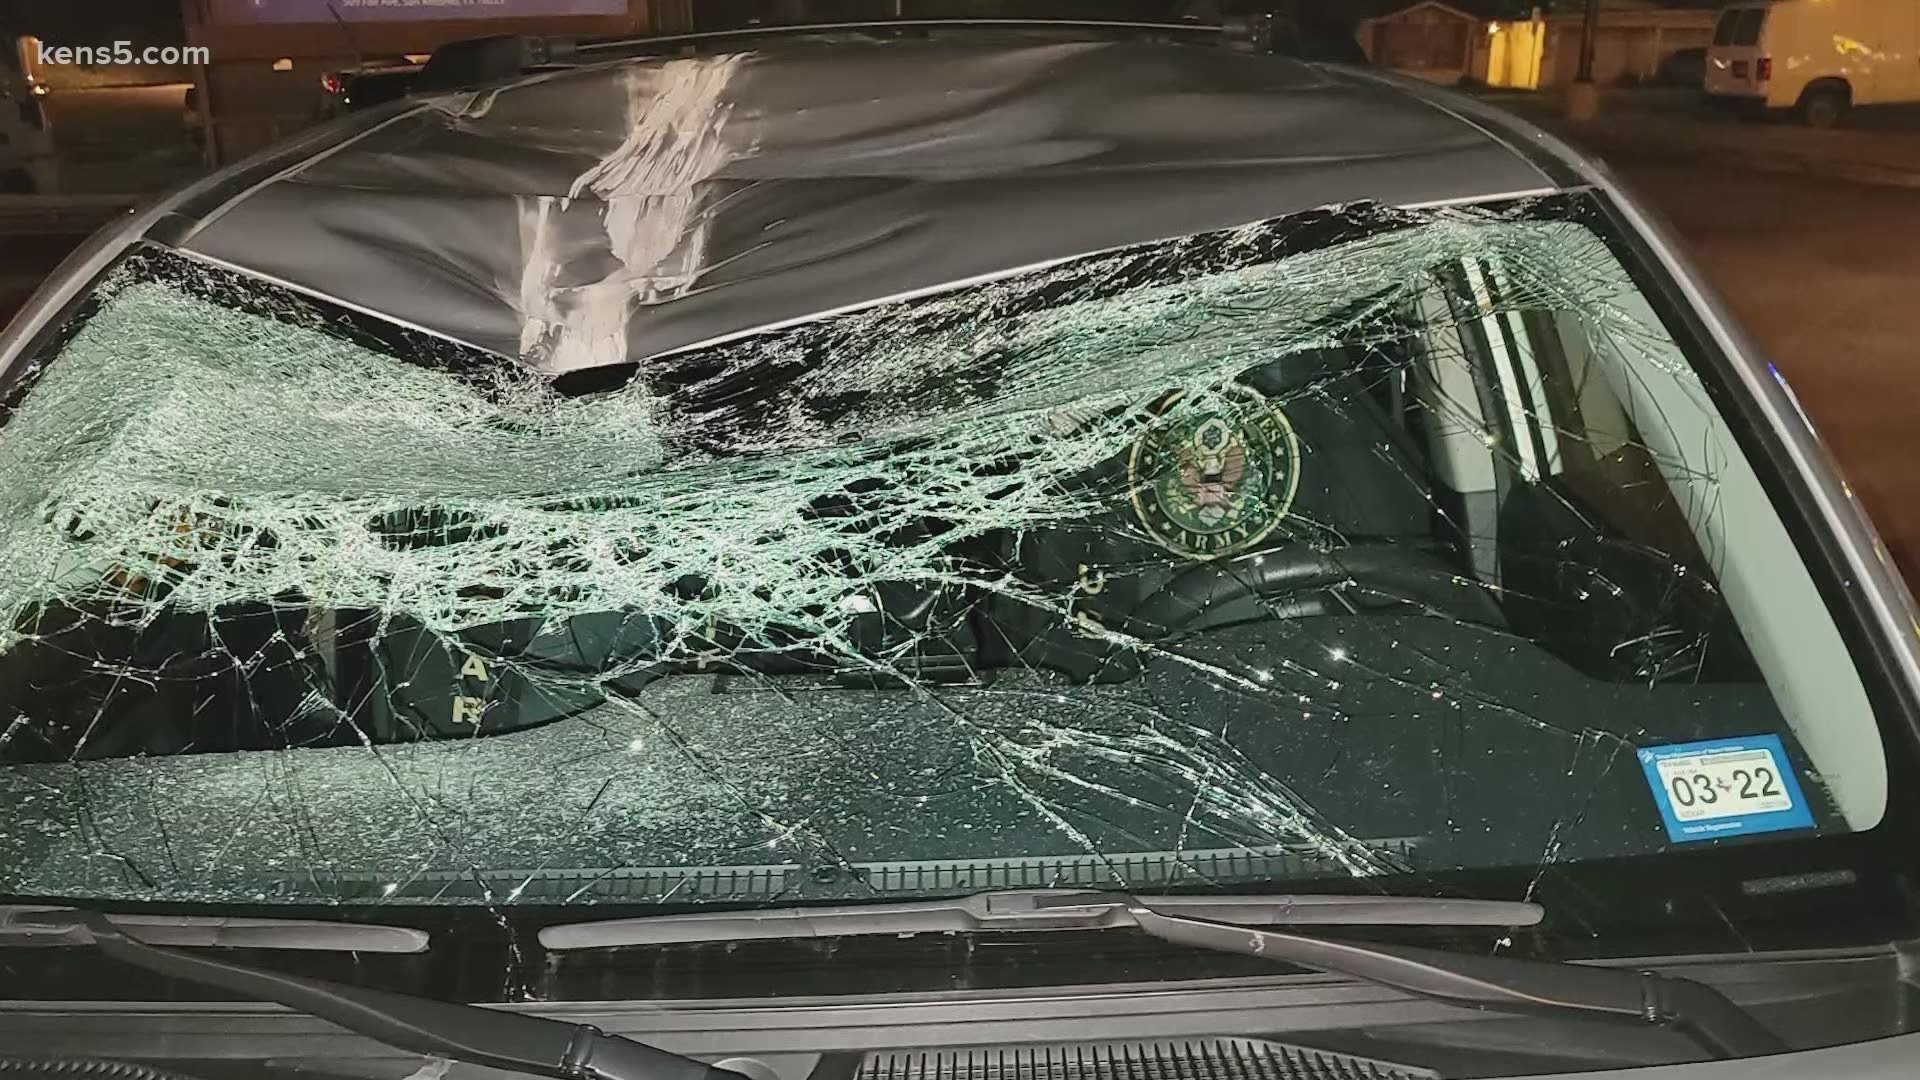 Another woman was sent to the hospital in June after a cinderblock was thrown at her car from the exact same overpass at I-37 and New Braunfels Avenue.